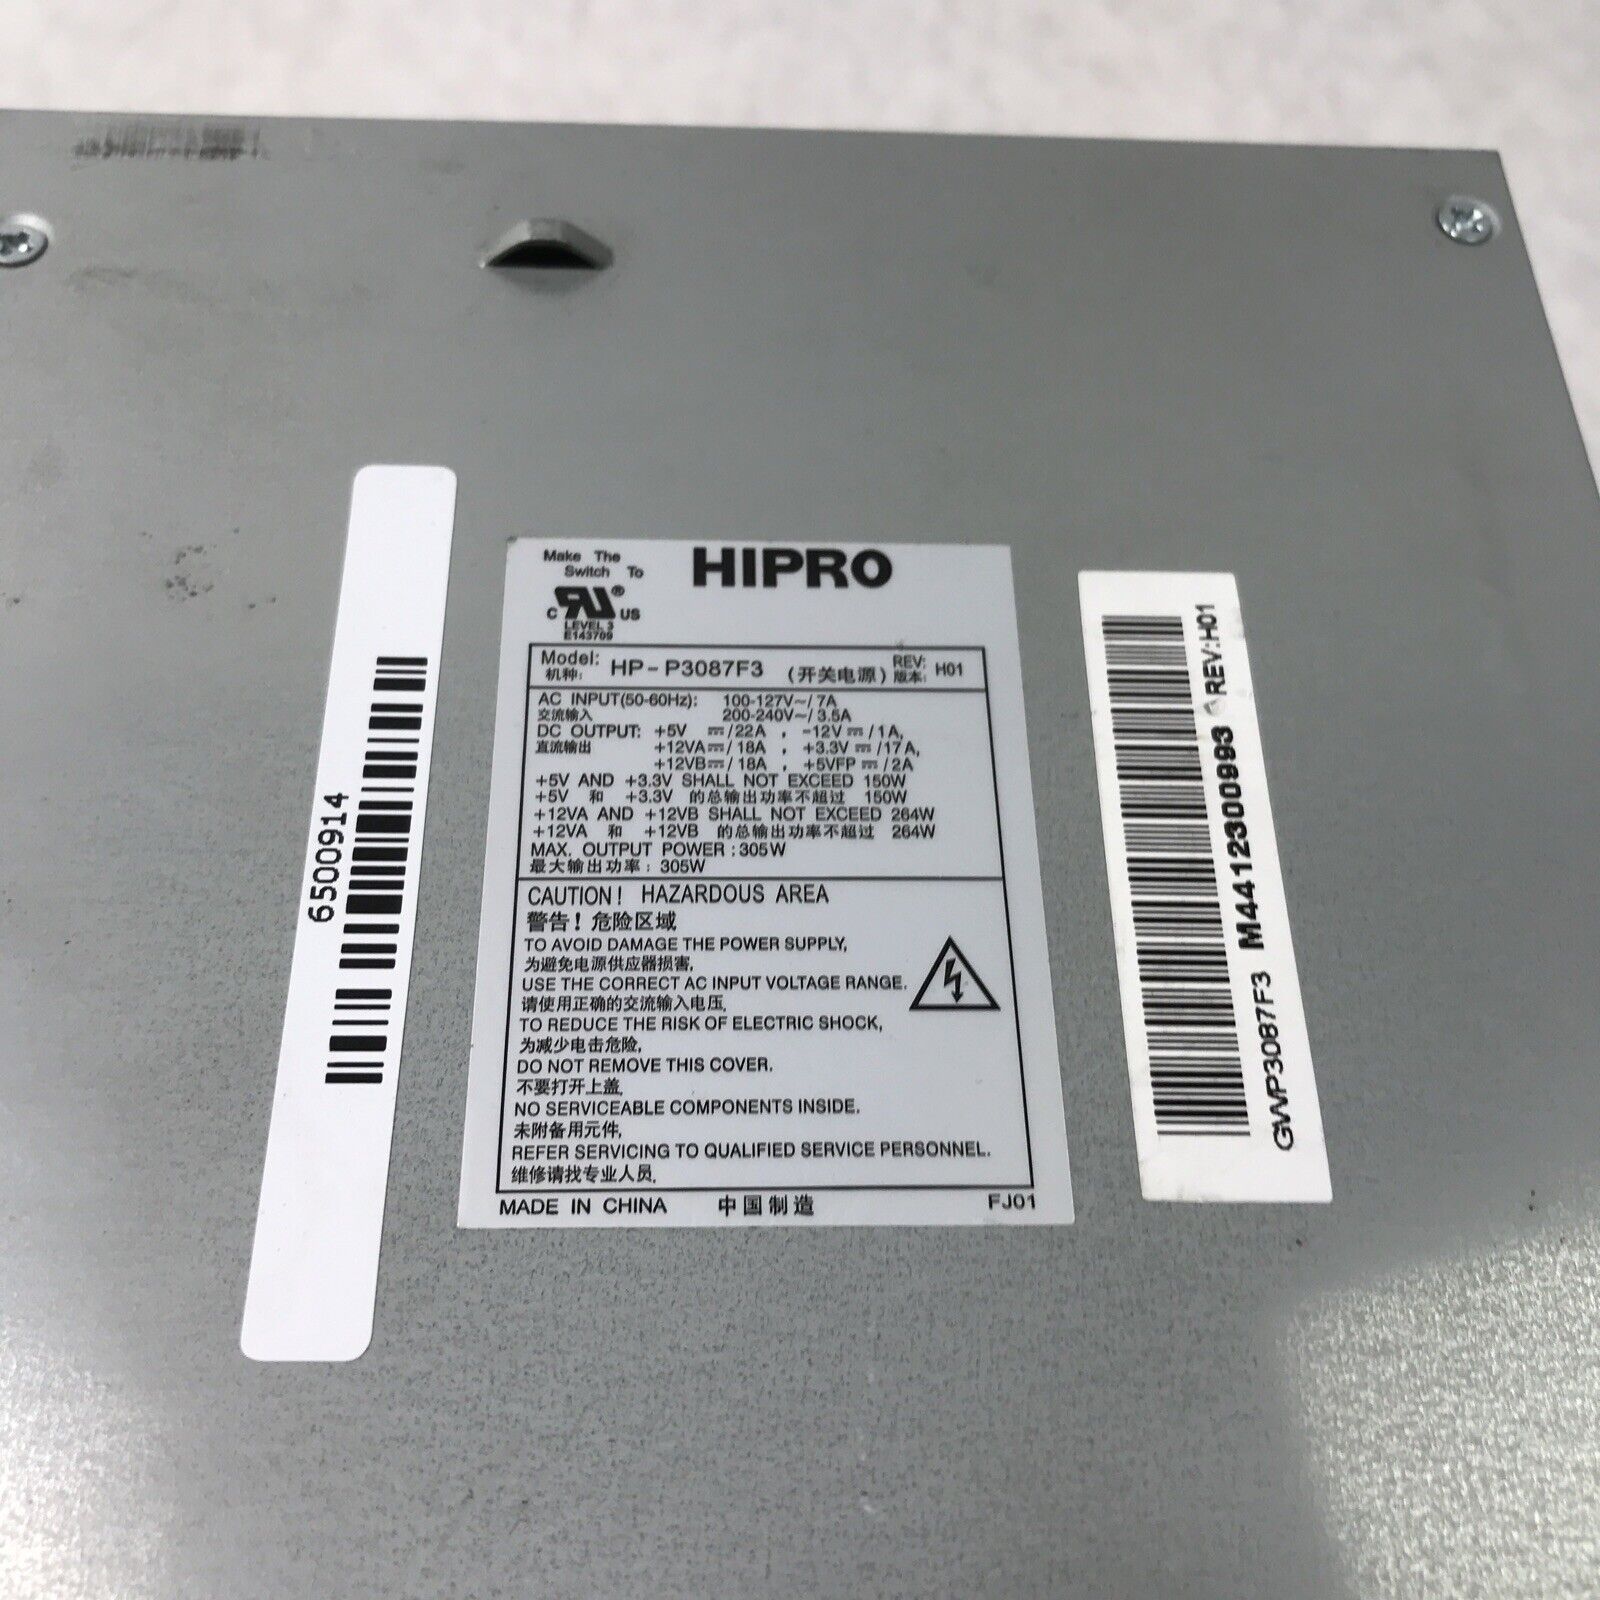 Hipro HP-P3087F3 240V 264W 18A Power Supply M4412300993 (Tested and Working)